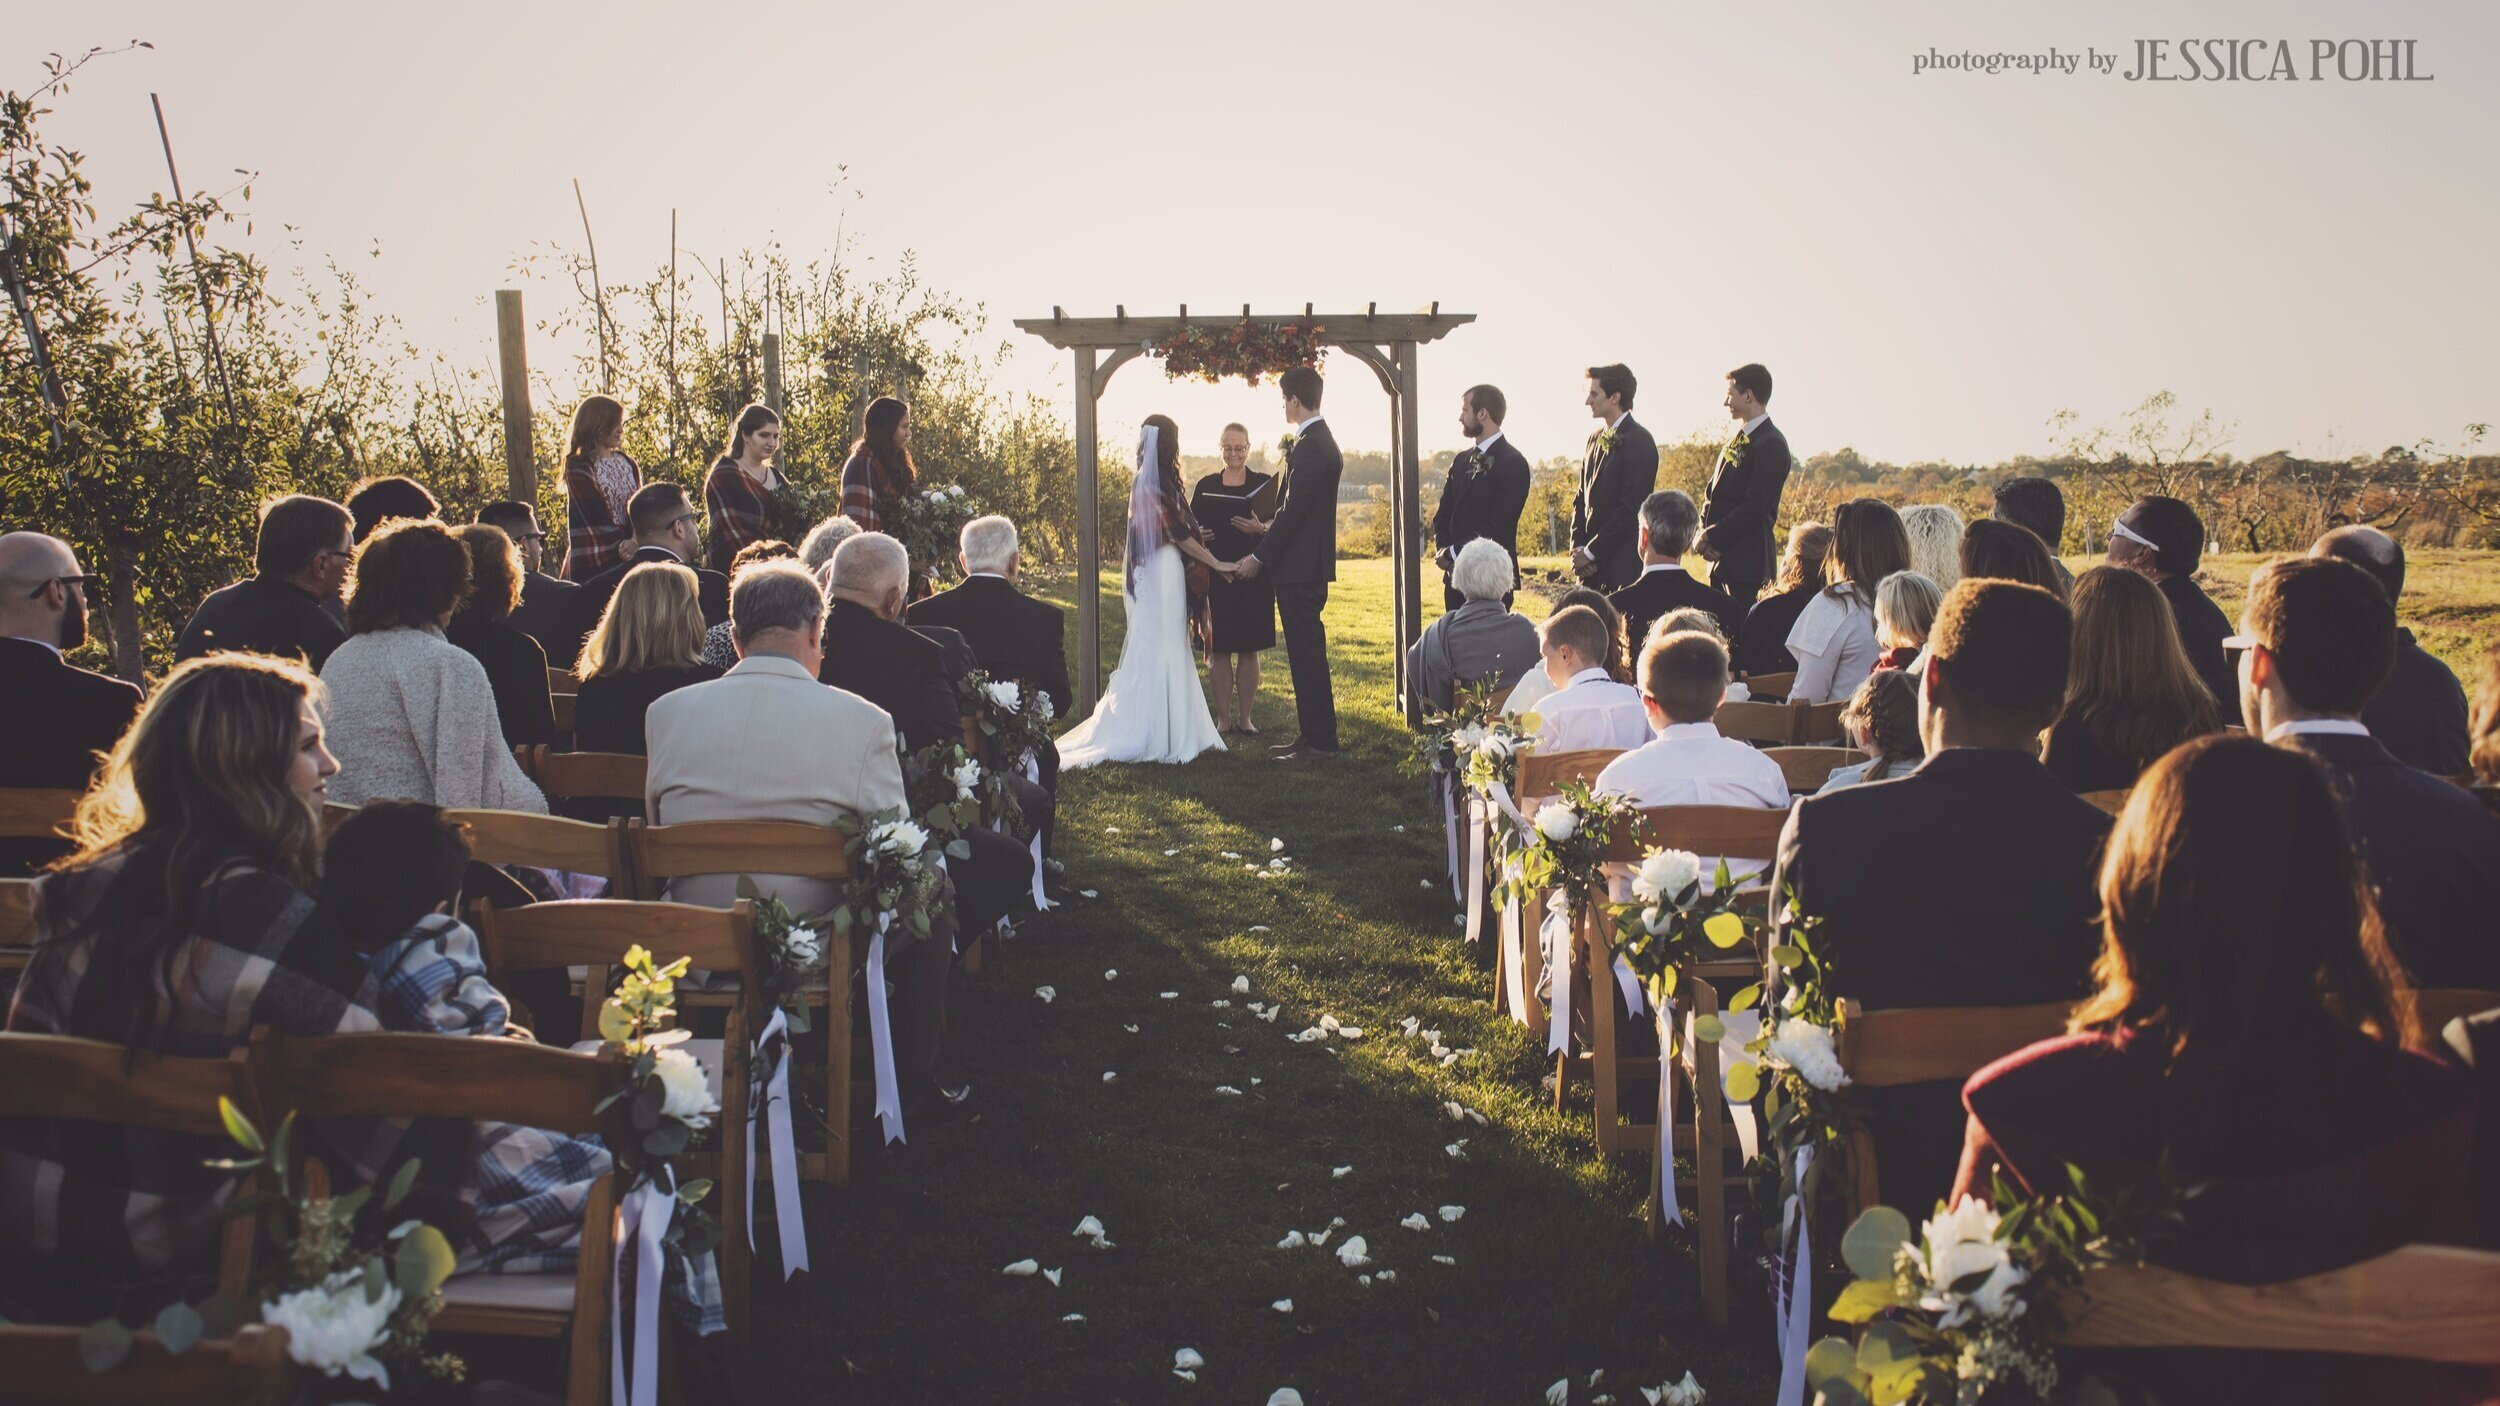 Sweet+Berry+Farm+outdoor+ceremony+Wedding+Newport+Rhode+Island+Middletown+RI+Photography+by+Jessica+Pohl.jpg